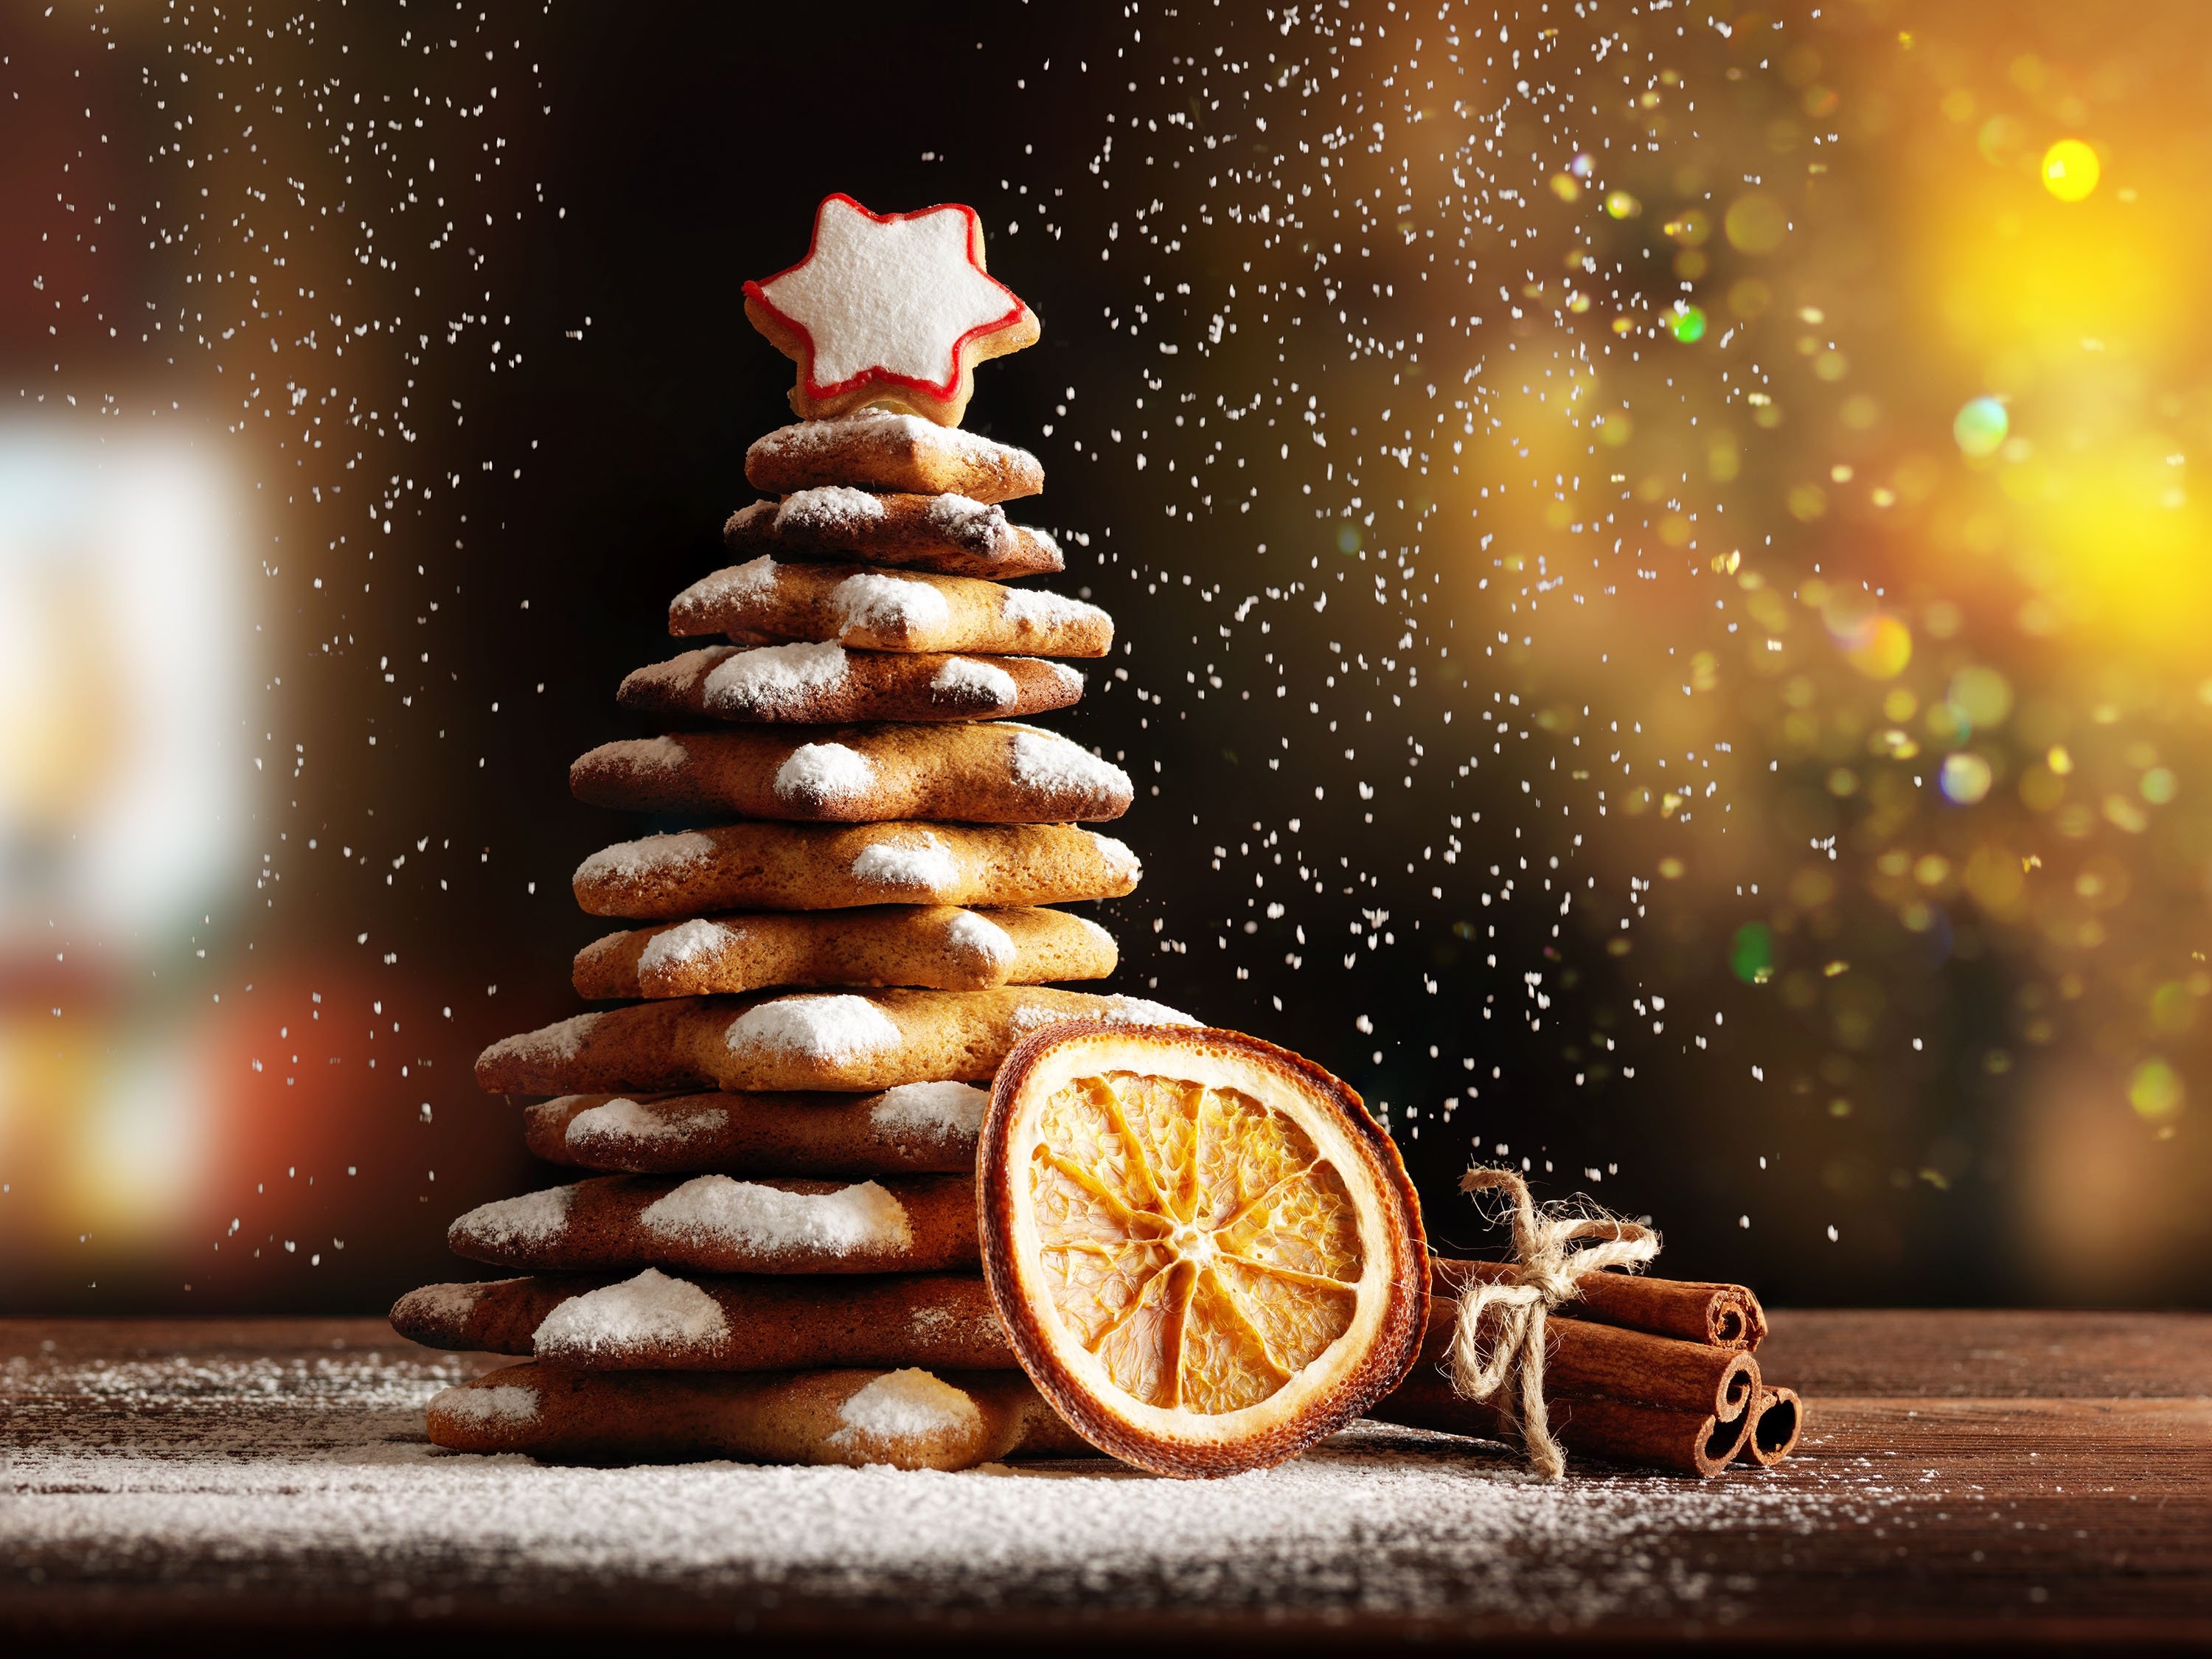 Homemade gingerbread cookies decorated with icing and sugar make up a Christmas tree. (Shutterstock Photo)